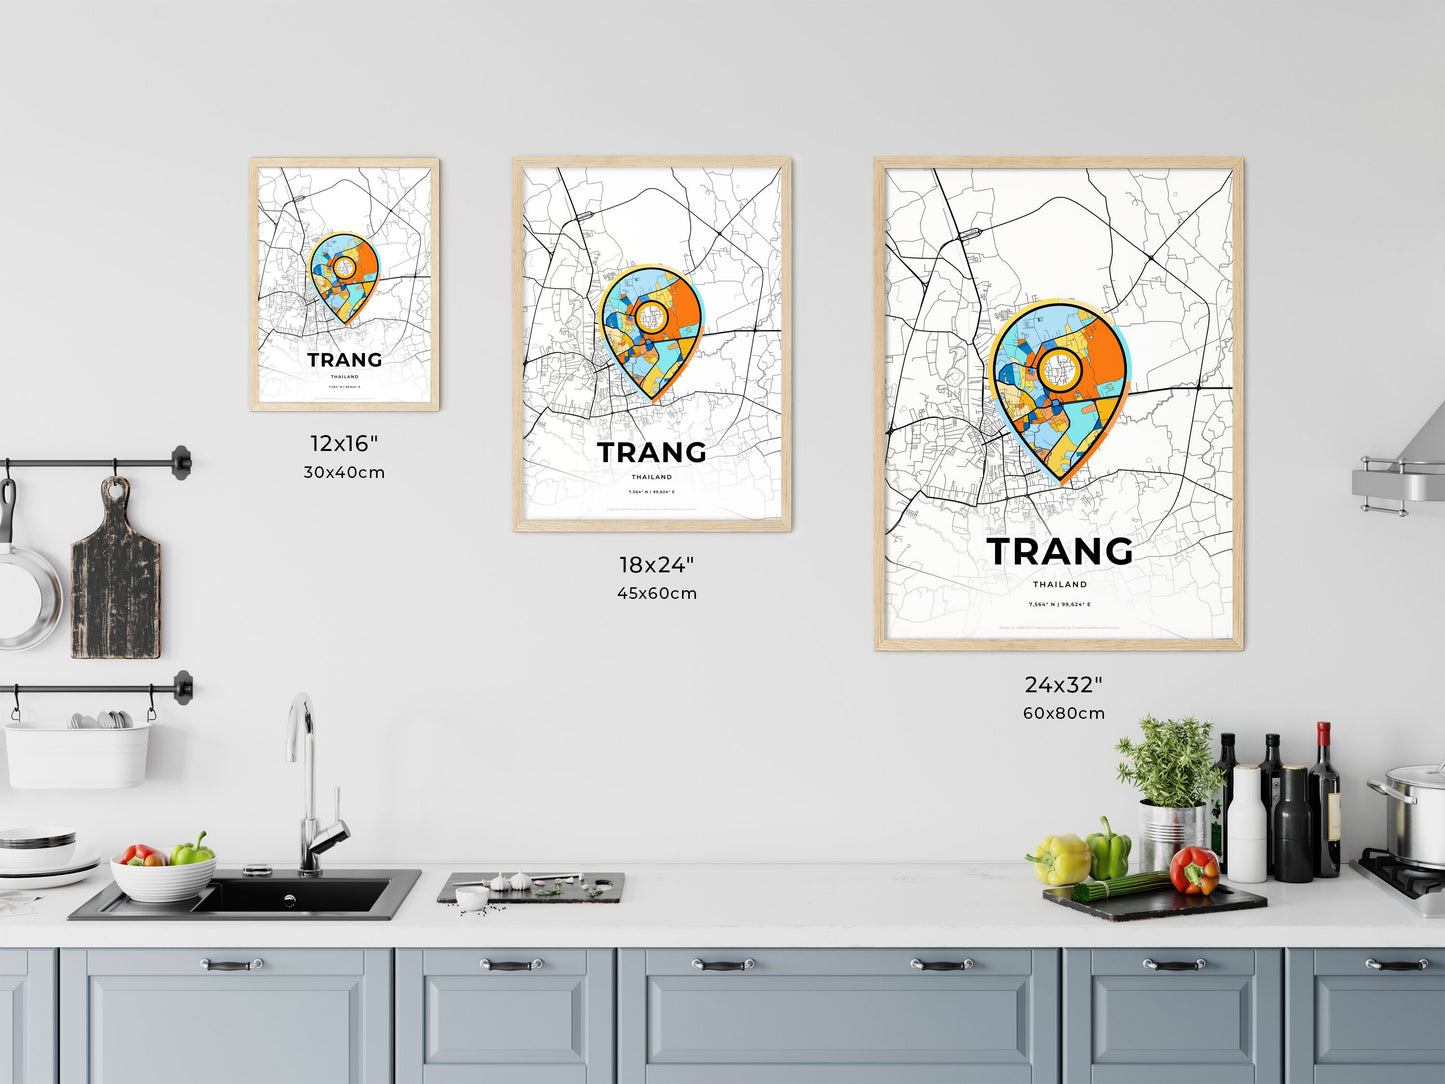 TRANG THAILAND minimal art map with a colorful icon.